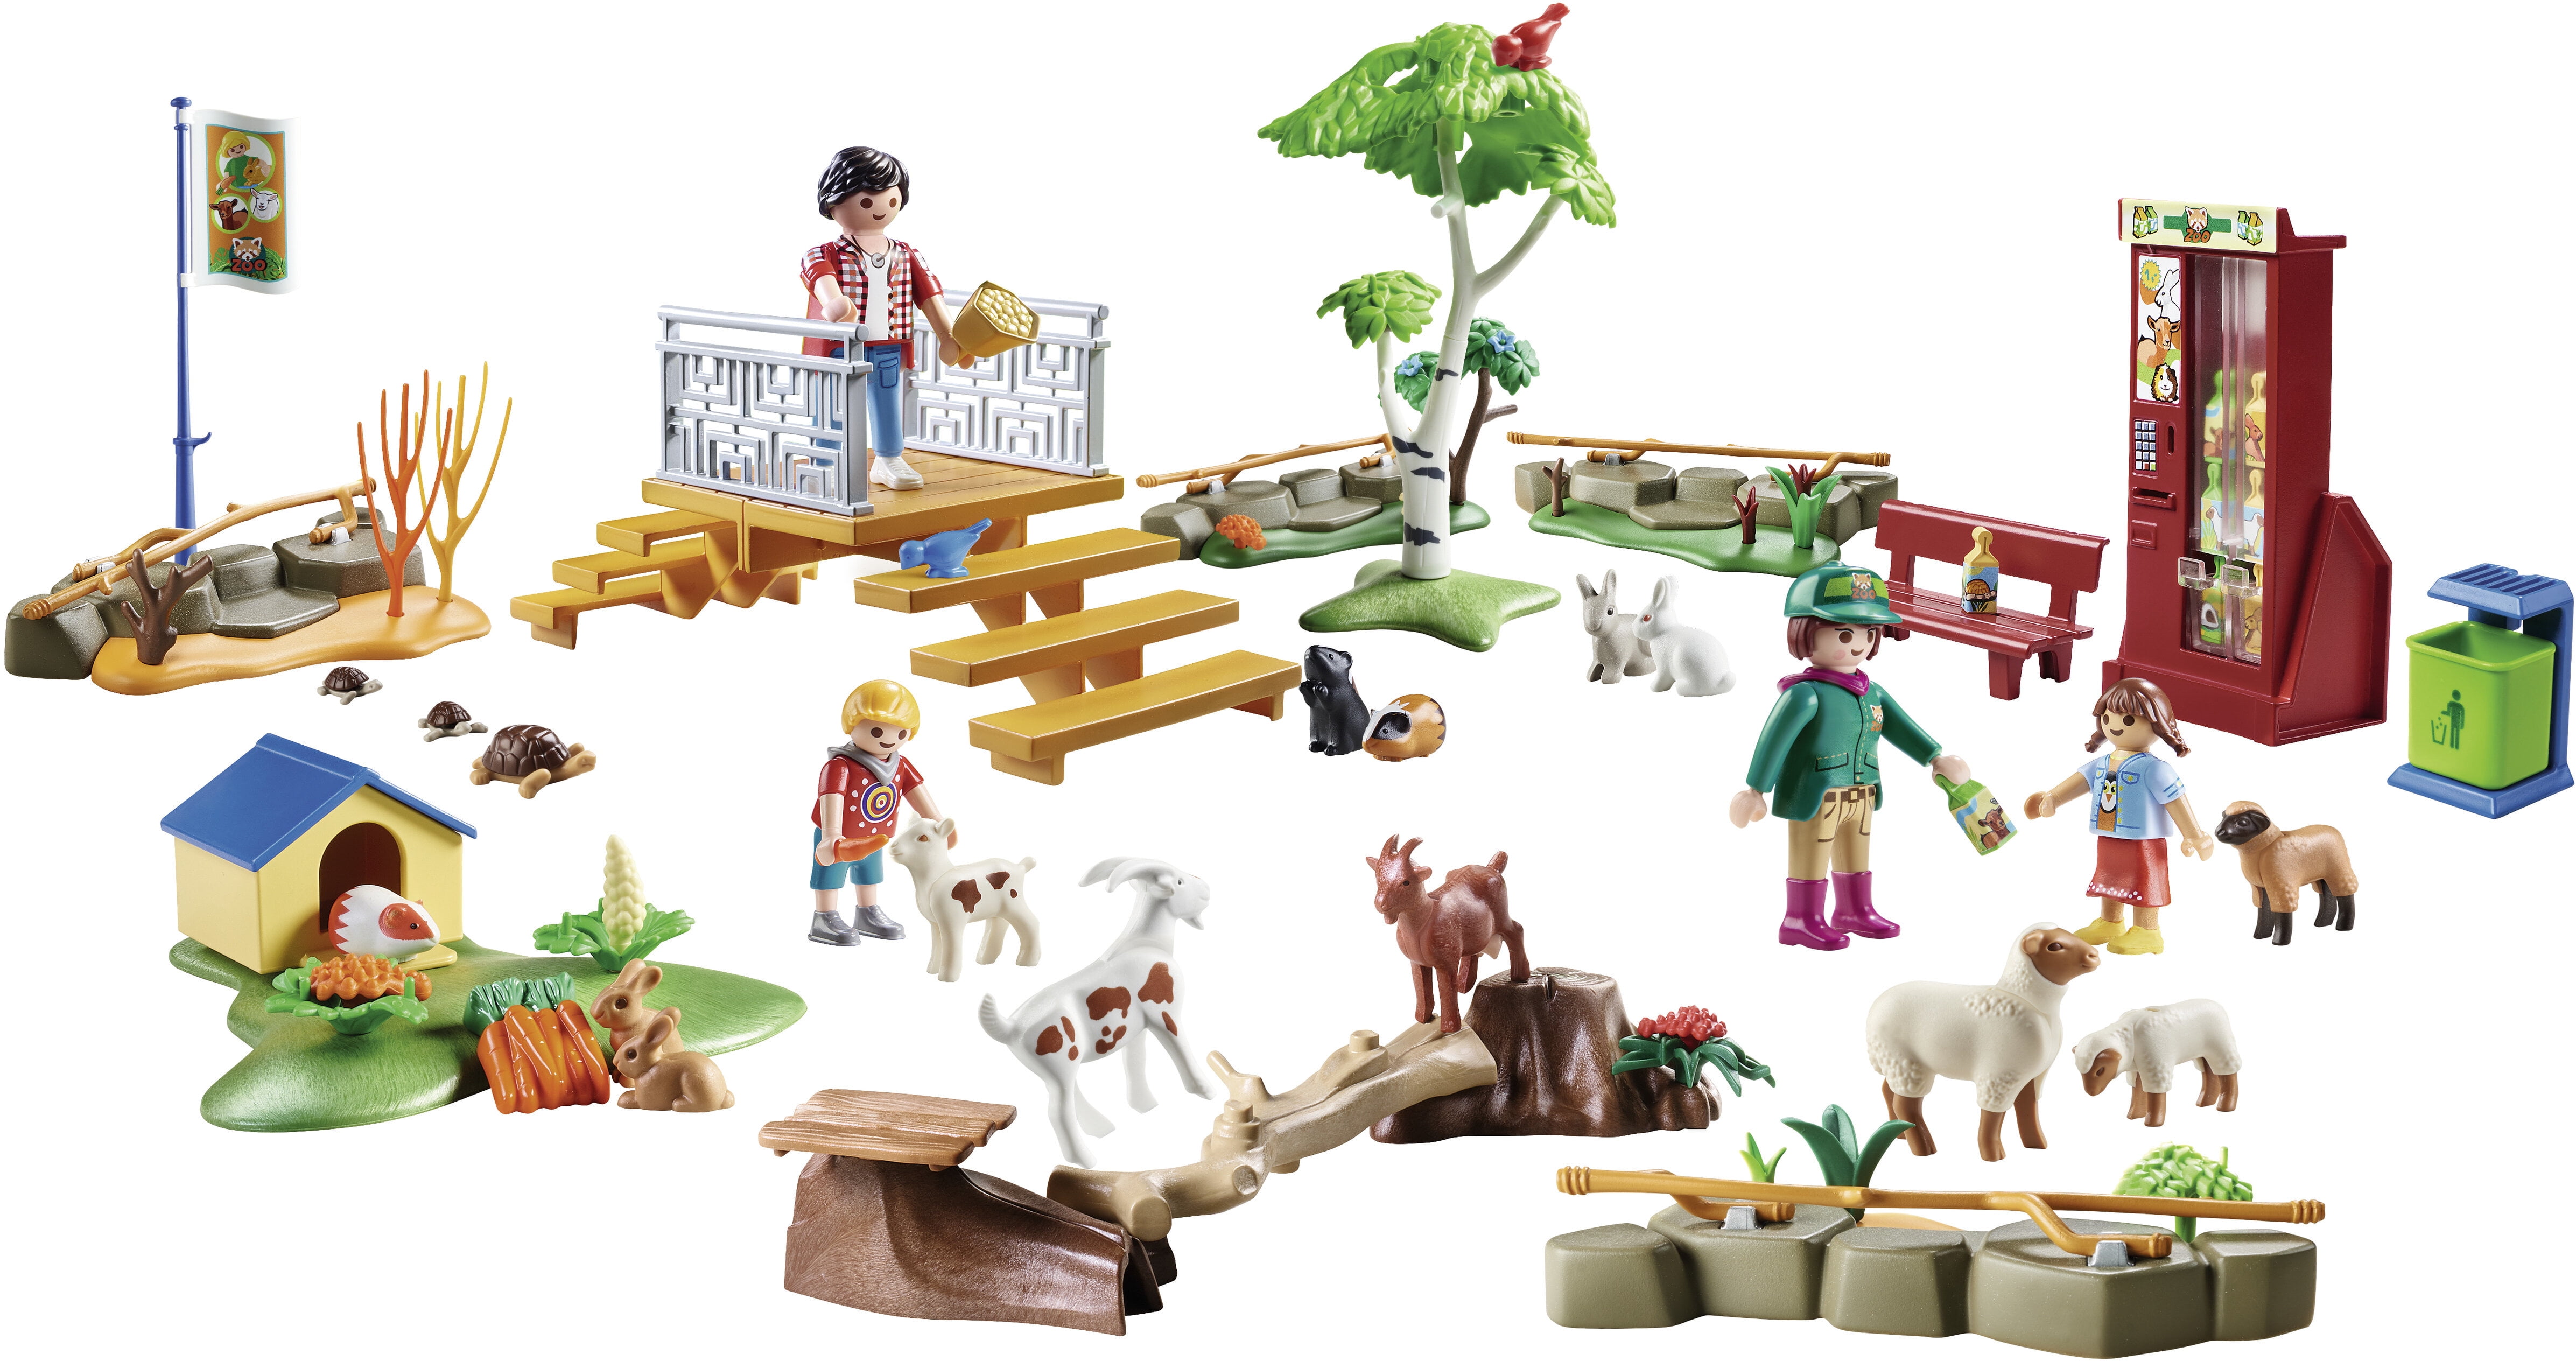 Playmobil Petting Zoo - The Toy Box Hanover